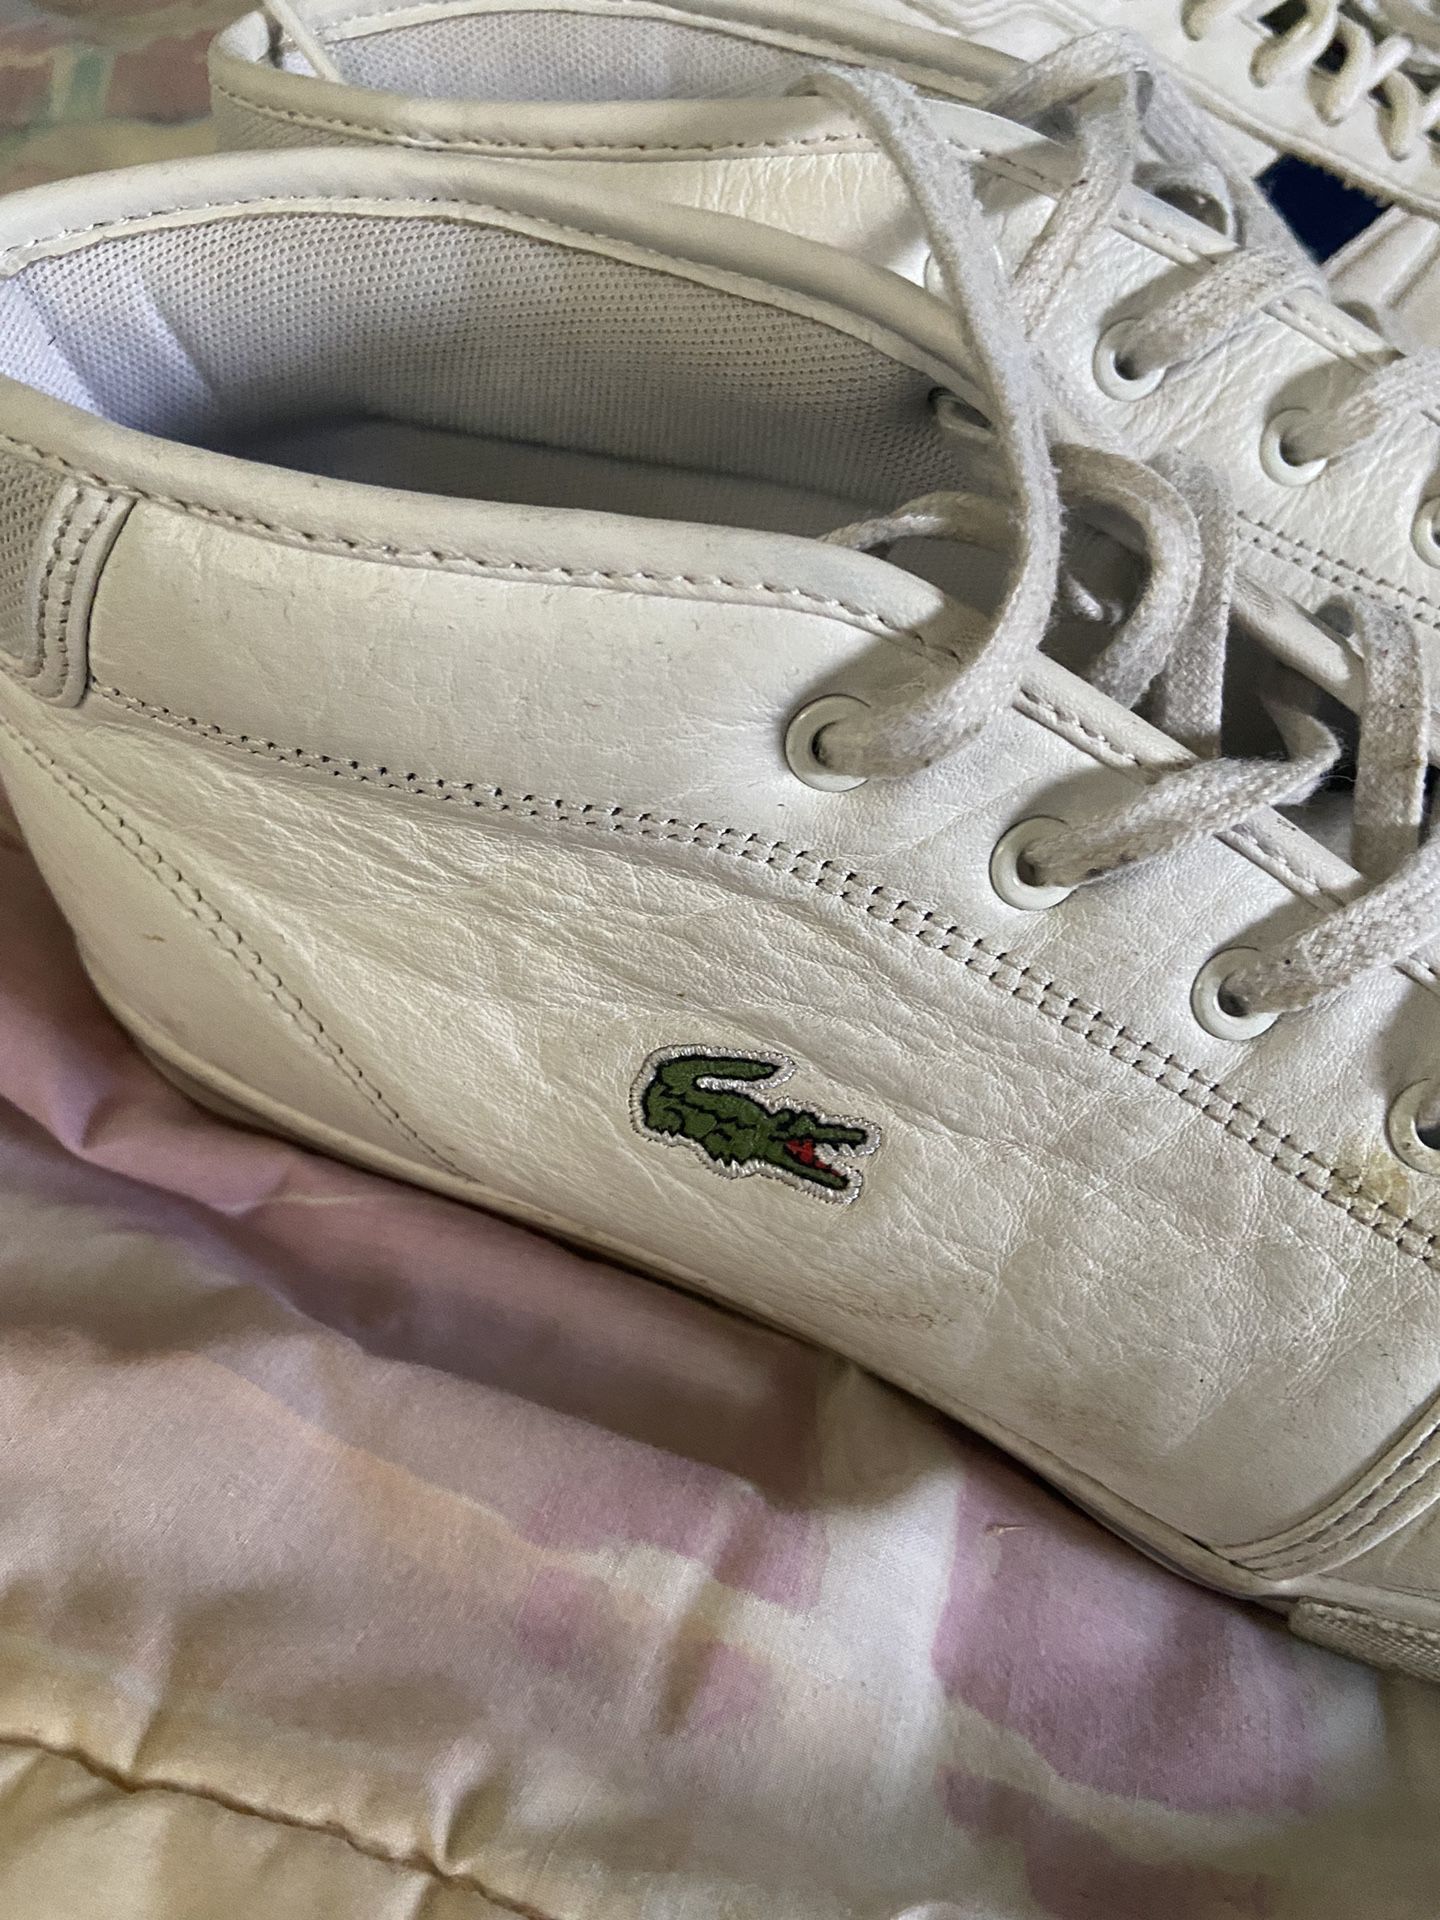 Lacoste #10  $70  For all